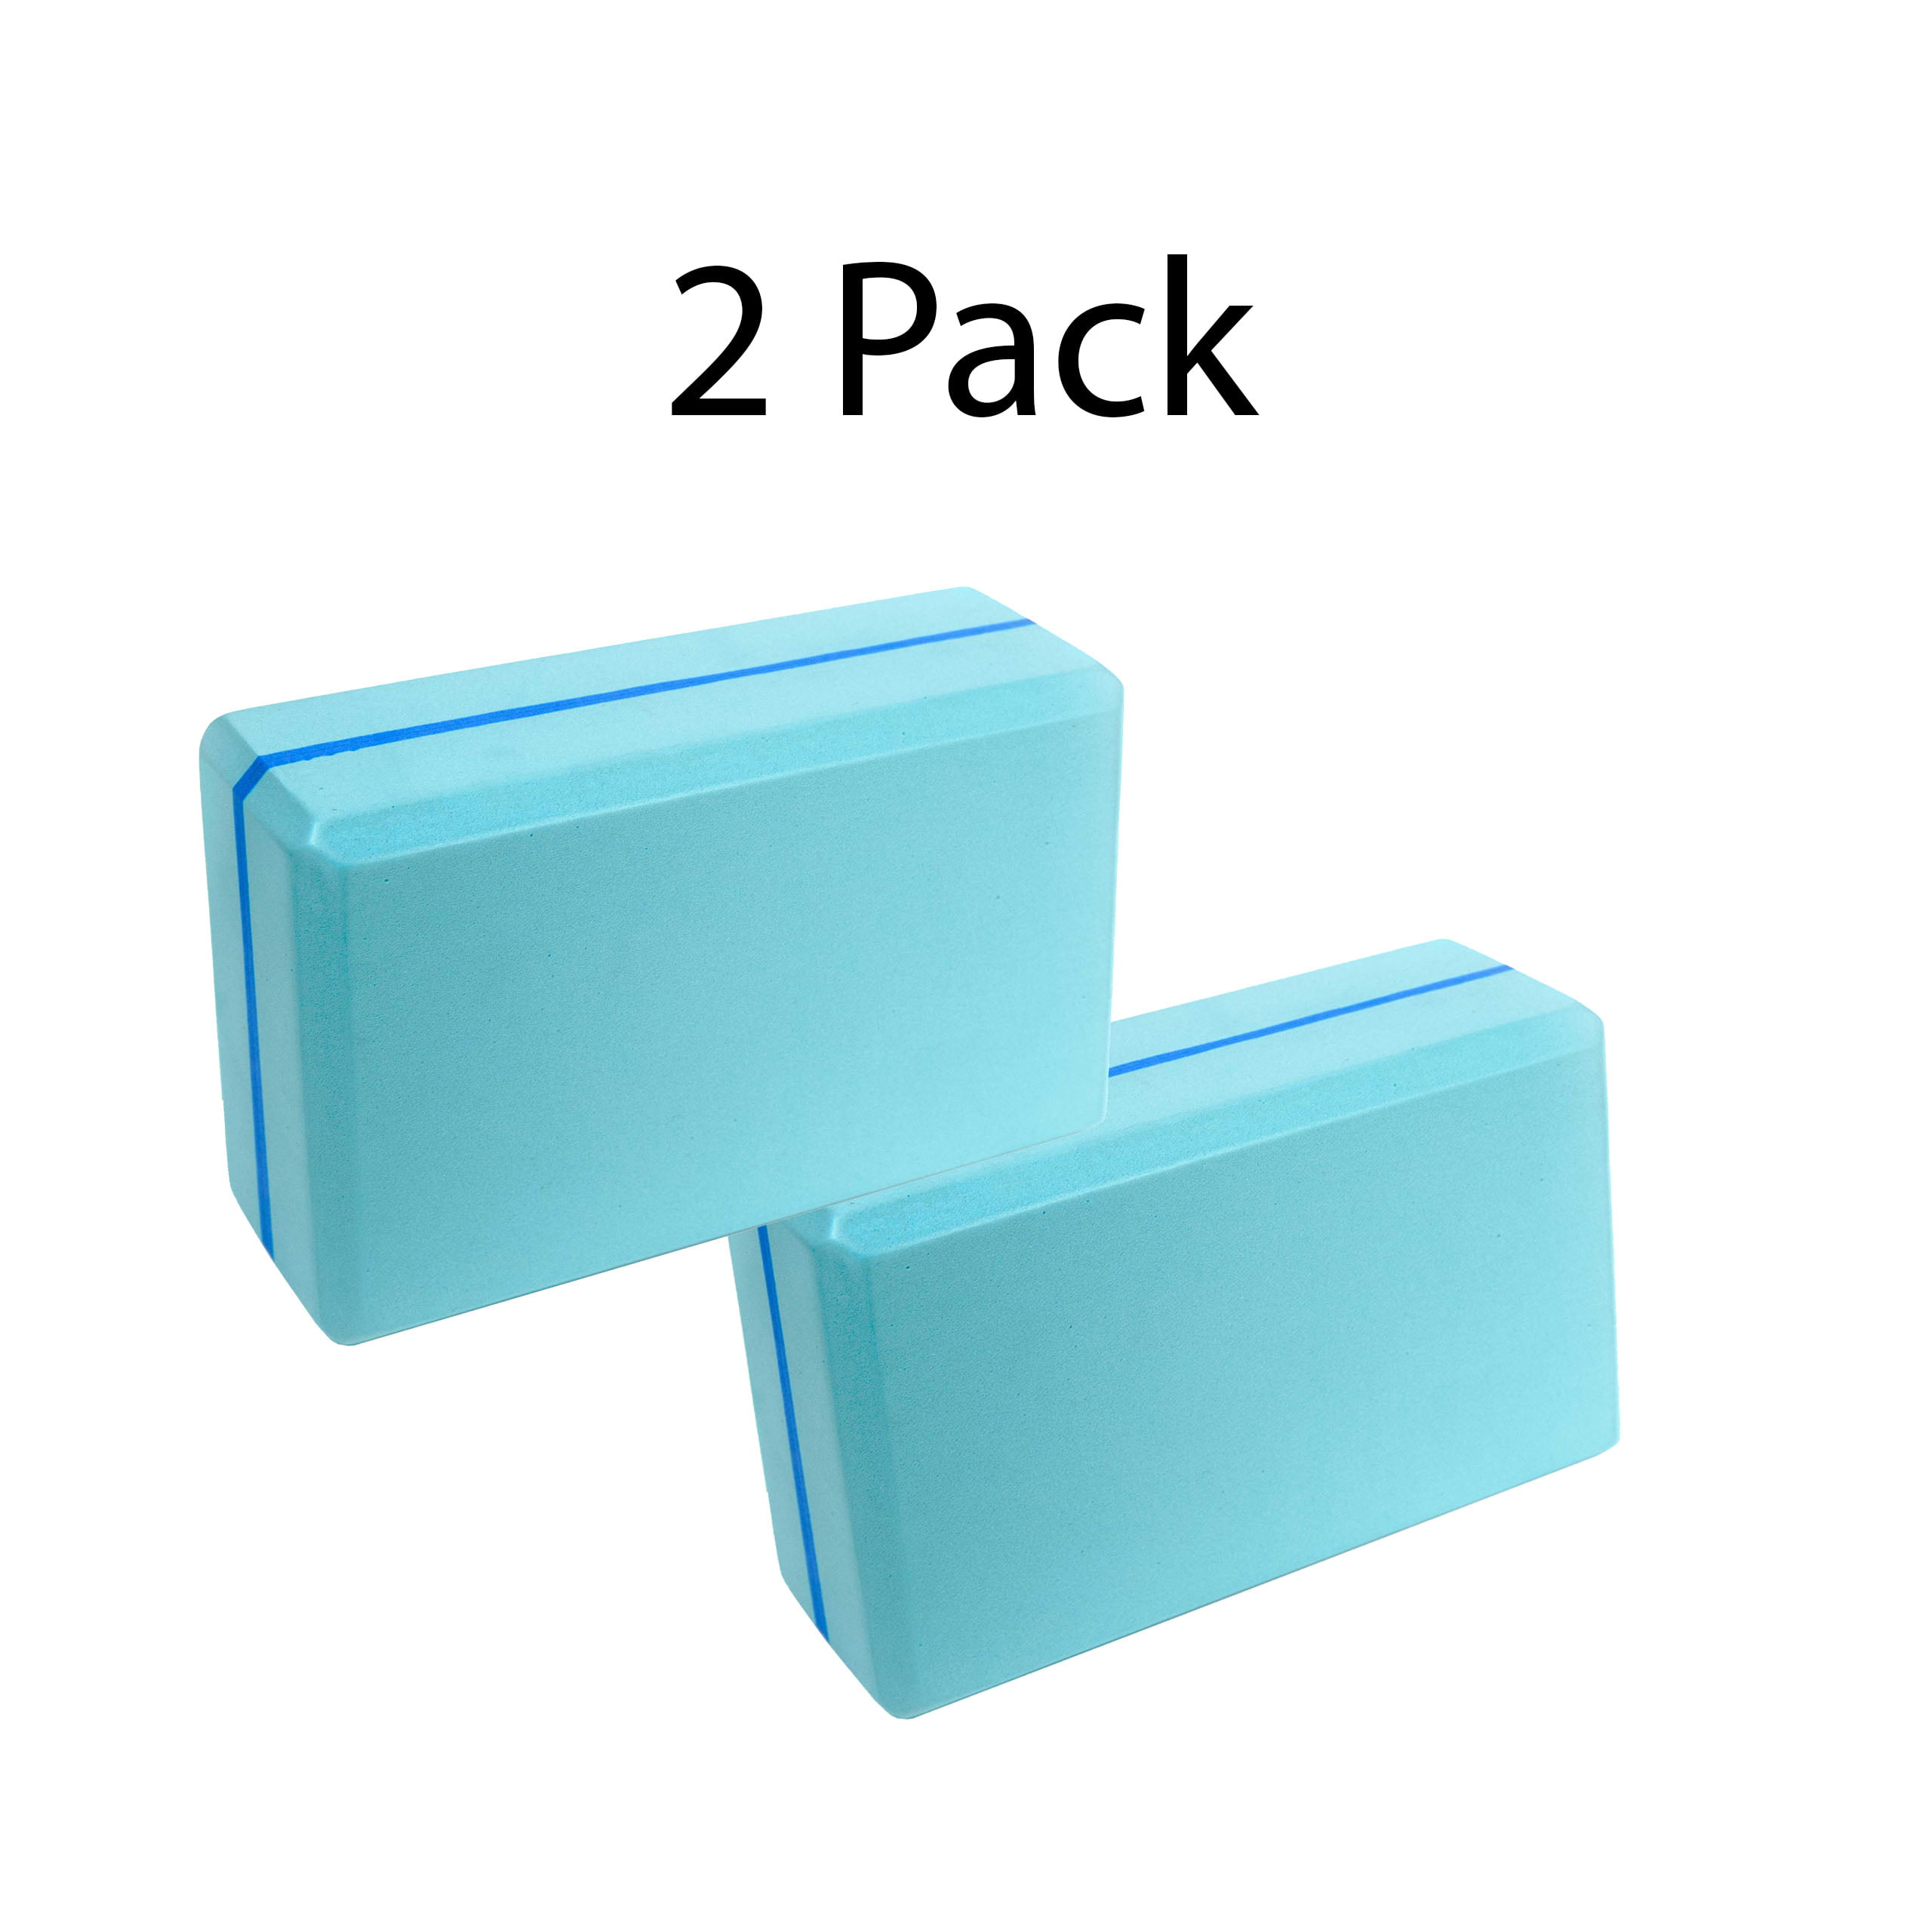 - High Density EVA Foam Block 1 or 2 PC We in This Together Blocks Support and Deepen Poses Odor and Moisture Resistant VIPELE Yoga Block Lightweight Improve Strength 